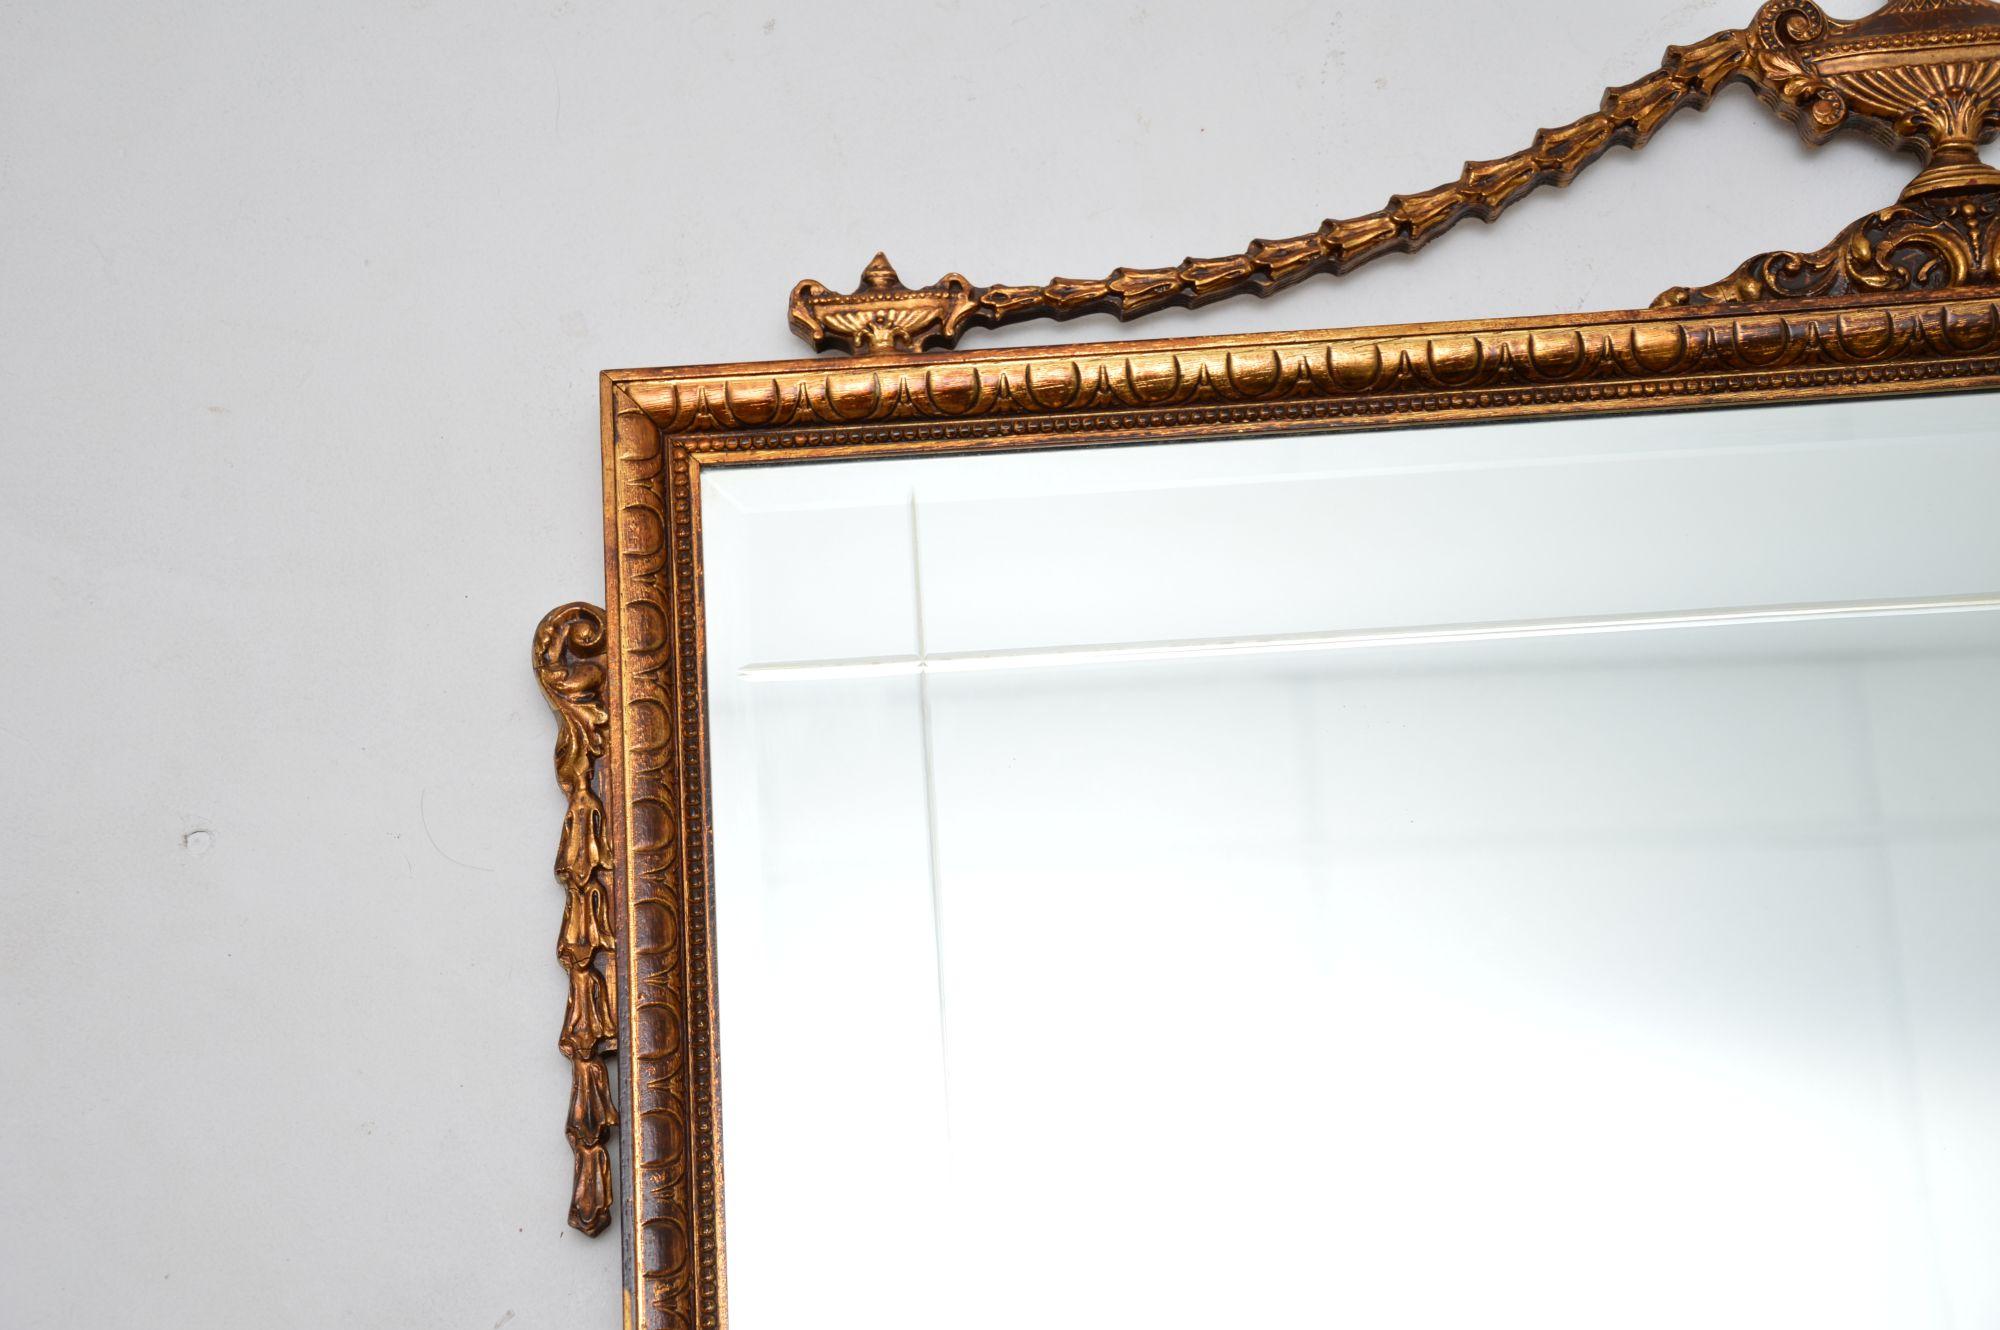 A very fine antique Adam style gilt wood mirror. This was made in England, it dates from around the 1950’s.

It is of superb quality, with beautiful details throughout. The glass is bevelled with etched borders, the gilt wood frame has a gorgeous